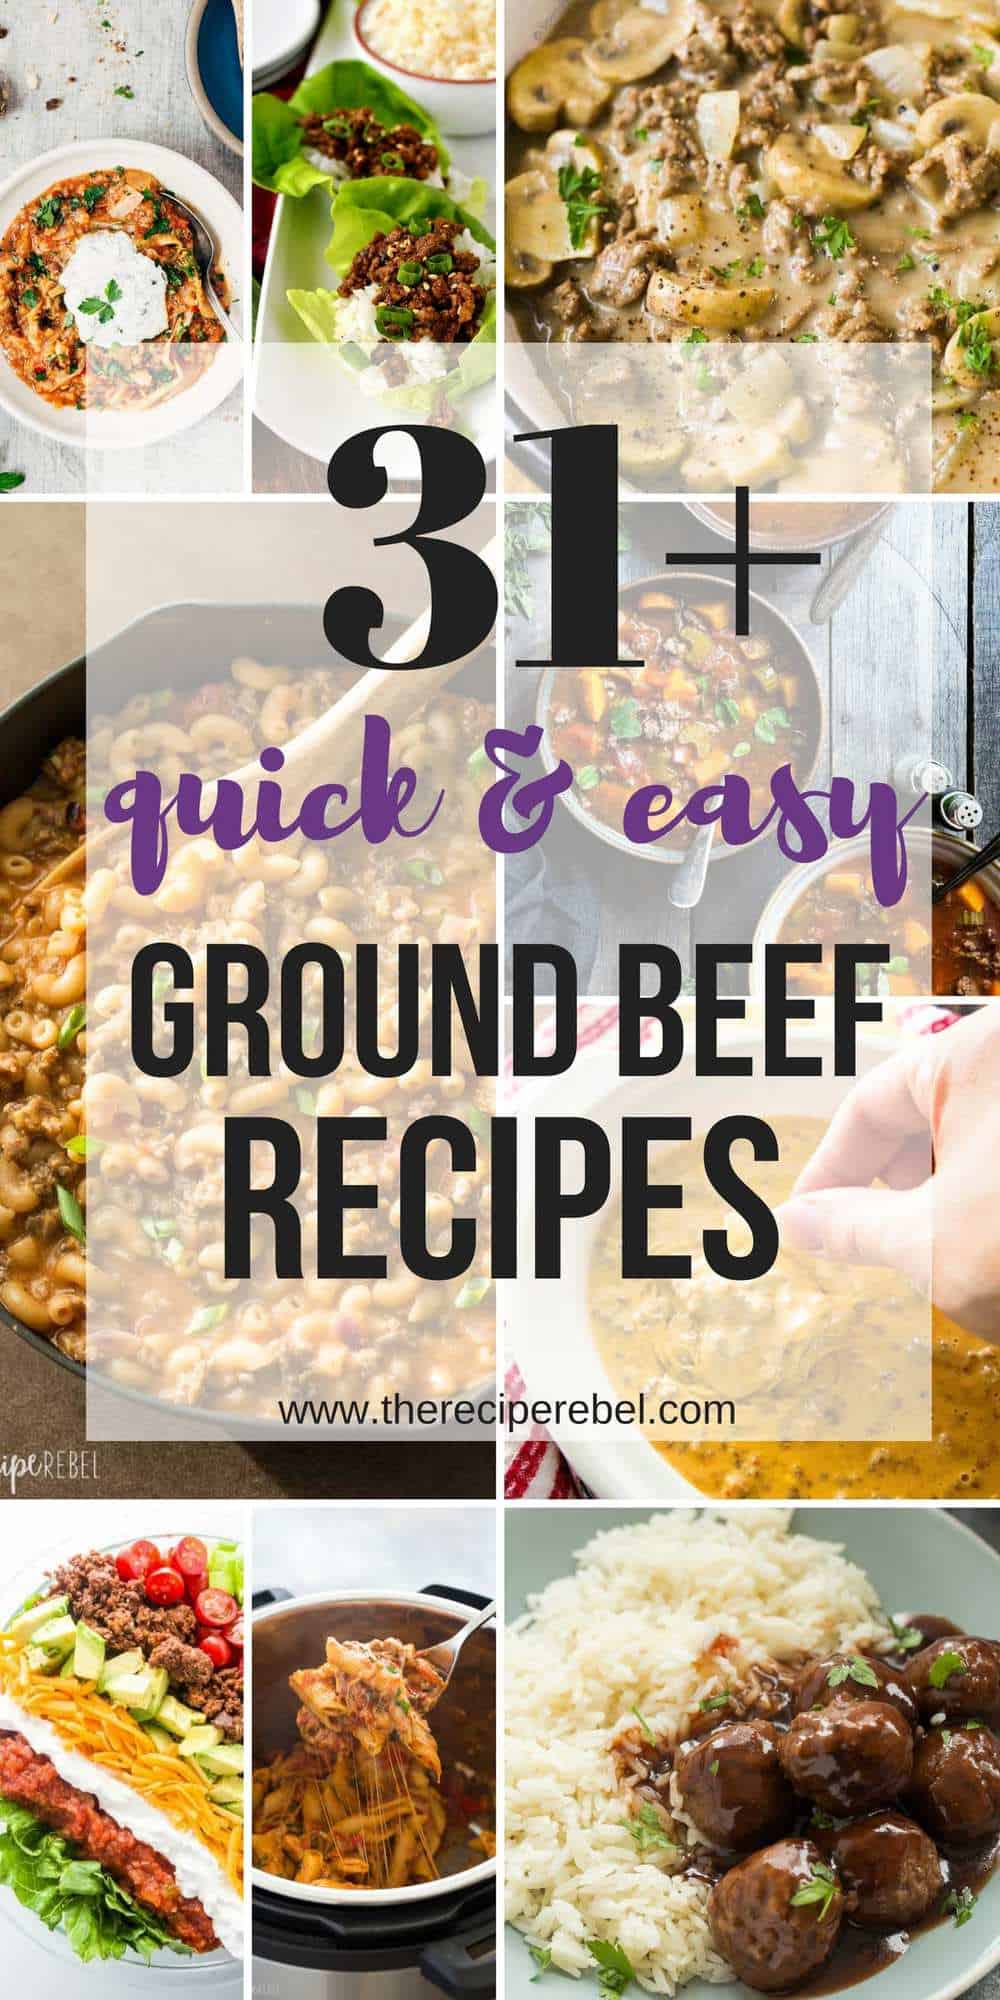 quick and easy ground beef recipes collage with multiple images and black and purple text